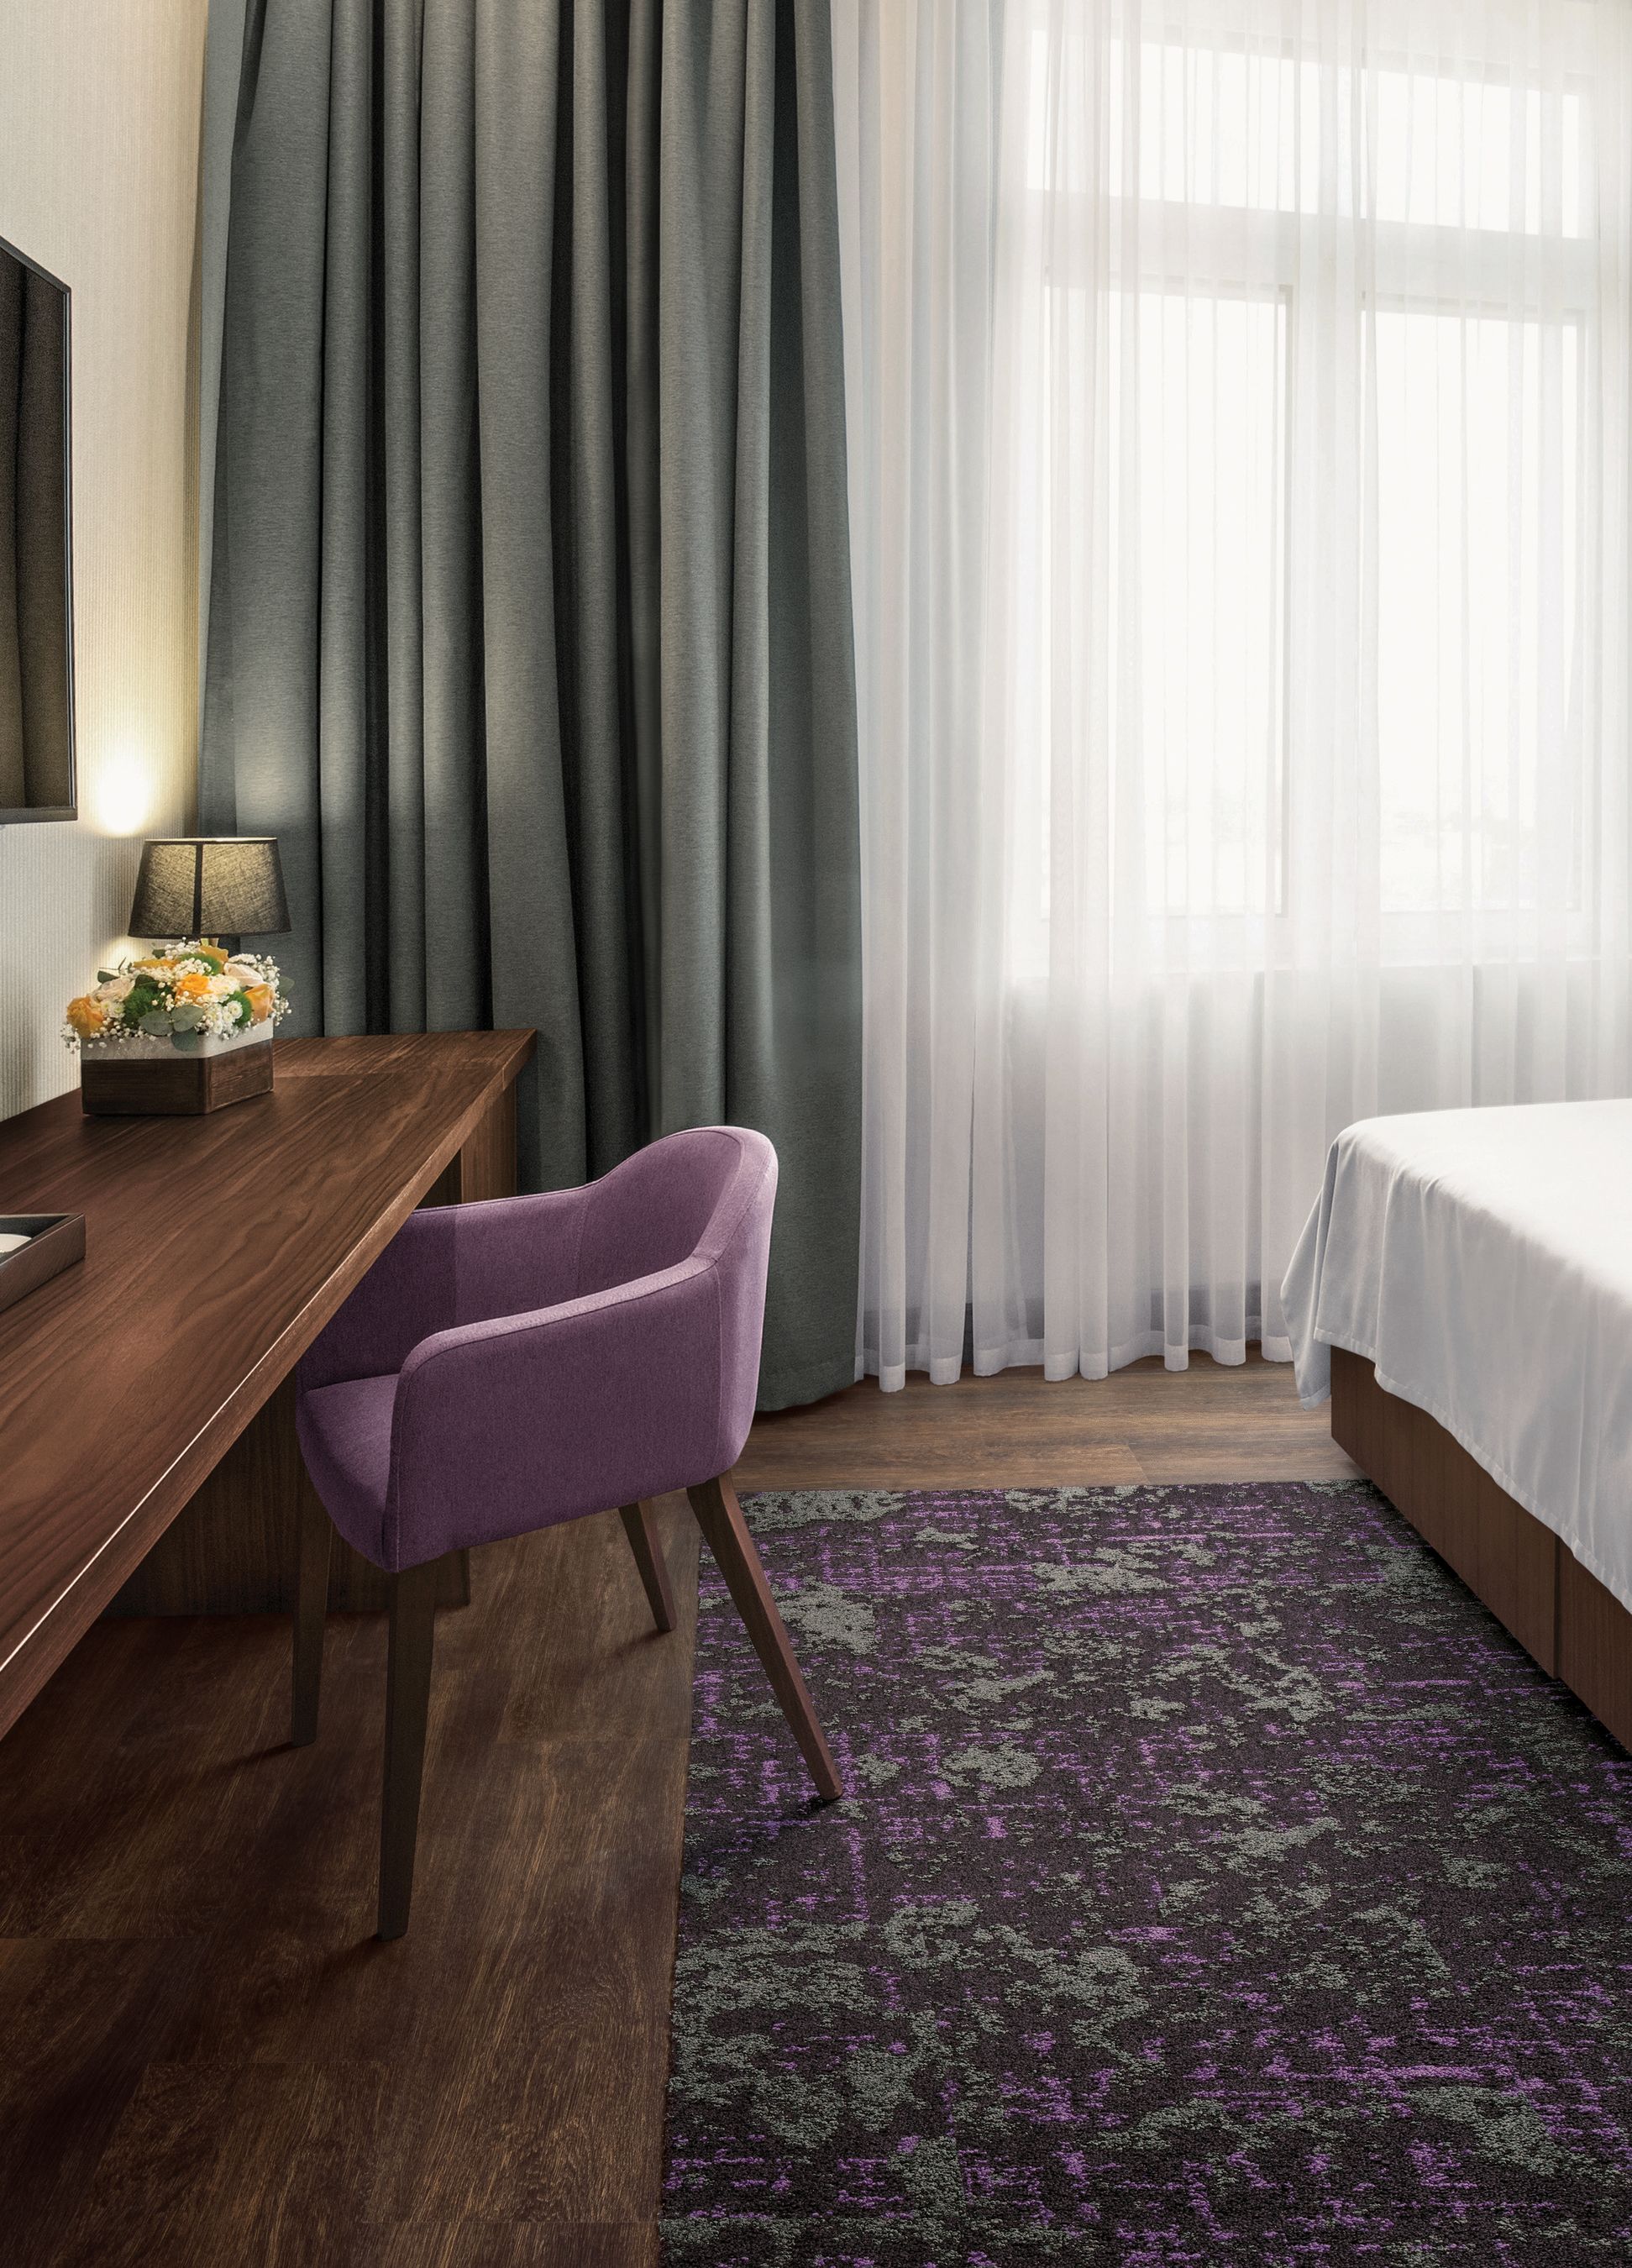 Interface Head in the Clouds carpet tile in hotel room with purple chair at desk imagen número 4